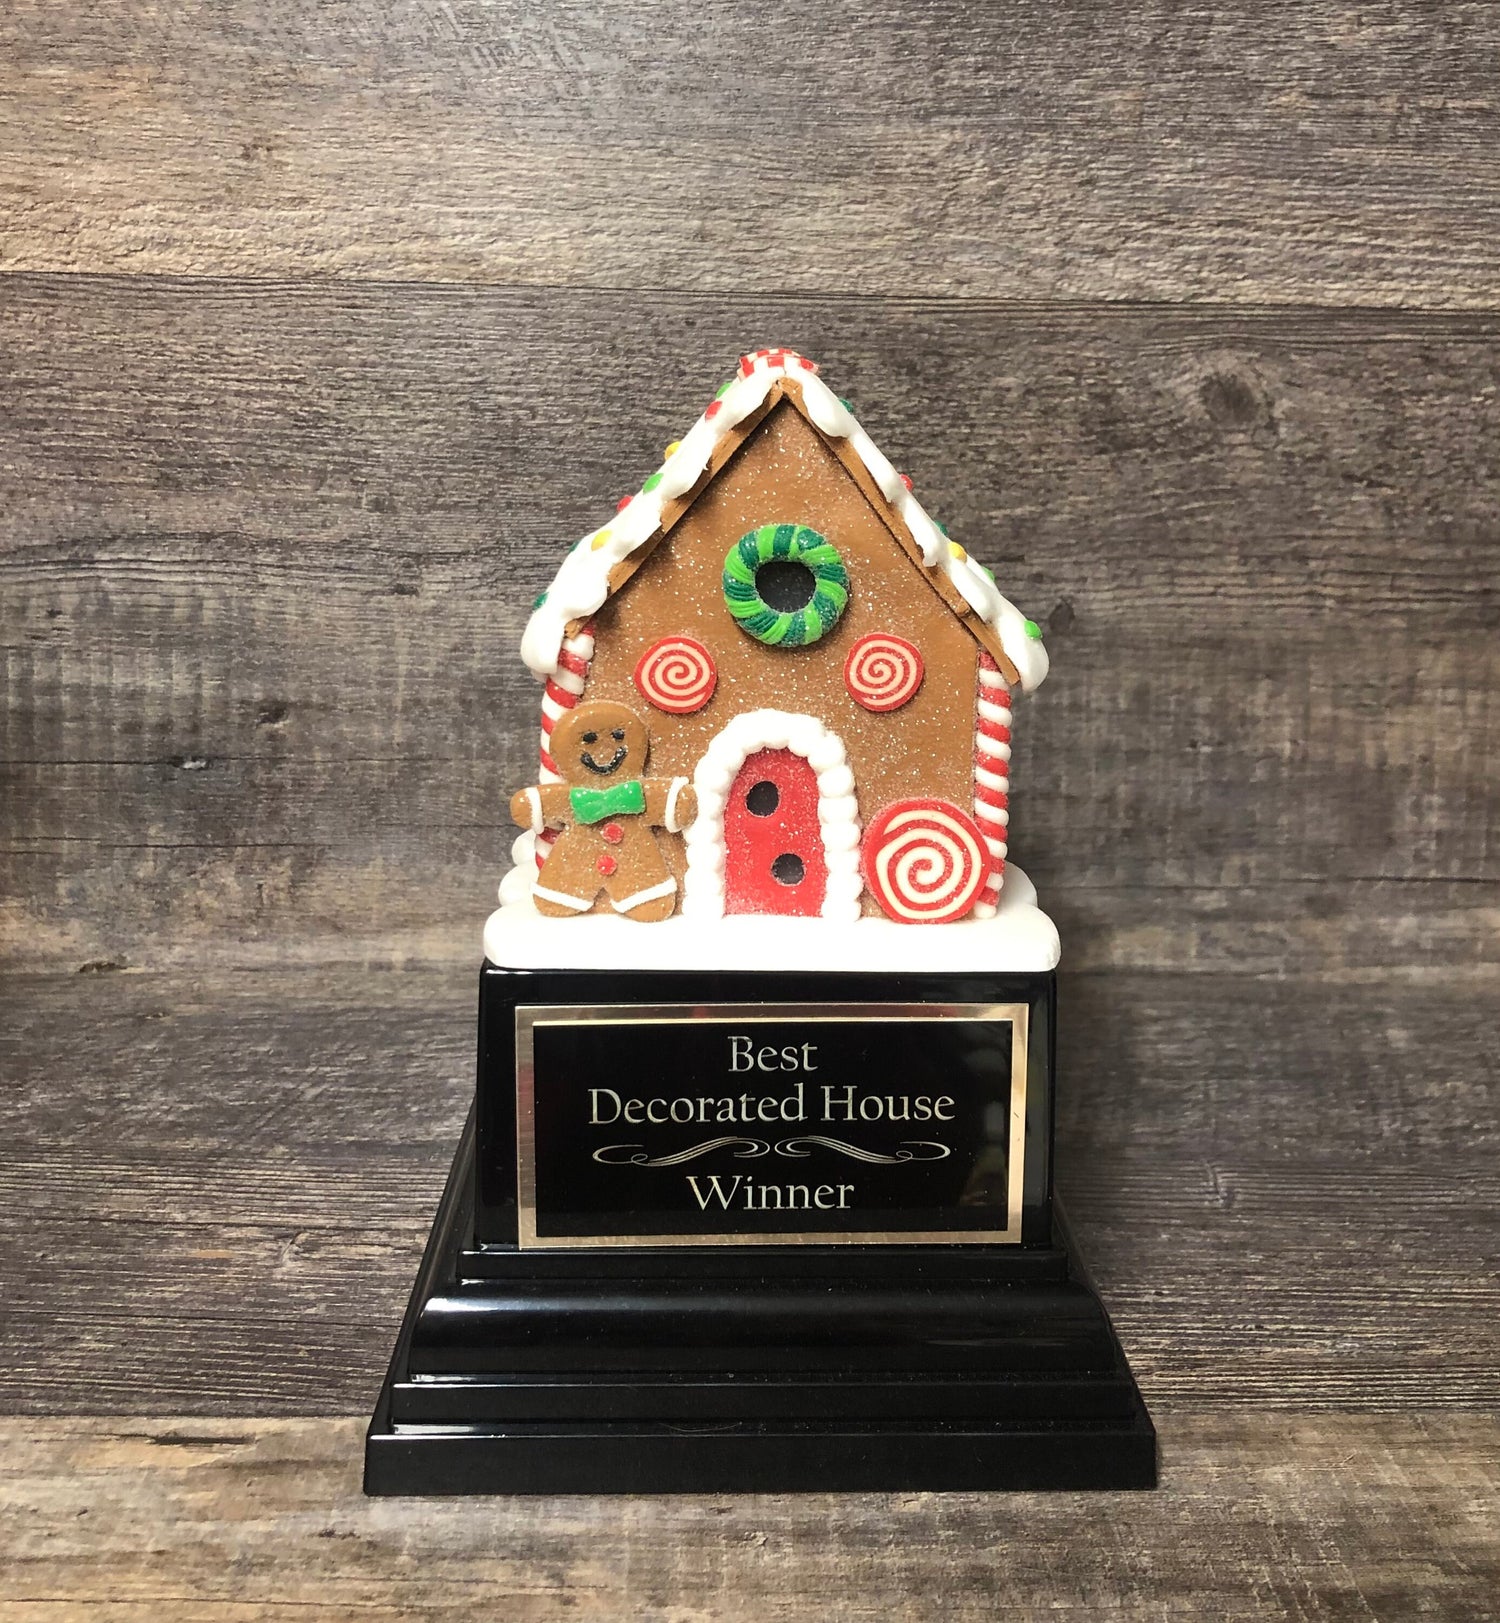 Gingerbread House Cookie Decorating Champion Bake Off Trophy 10" Med Size Ugly Sweater Trophy Christmas Holiday Party Santa Christmas Decor